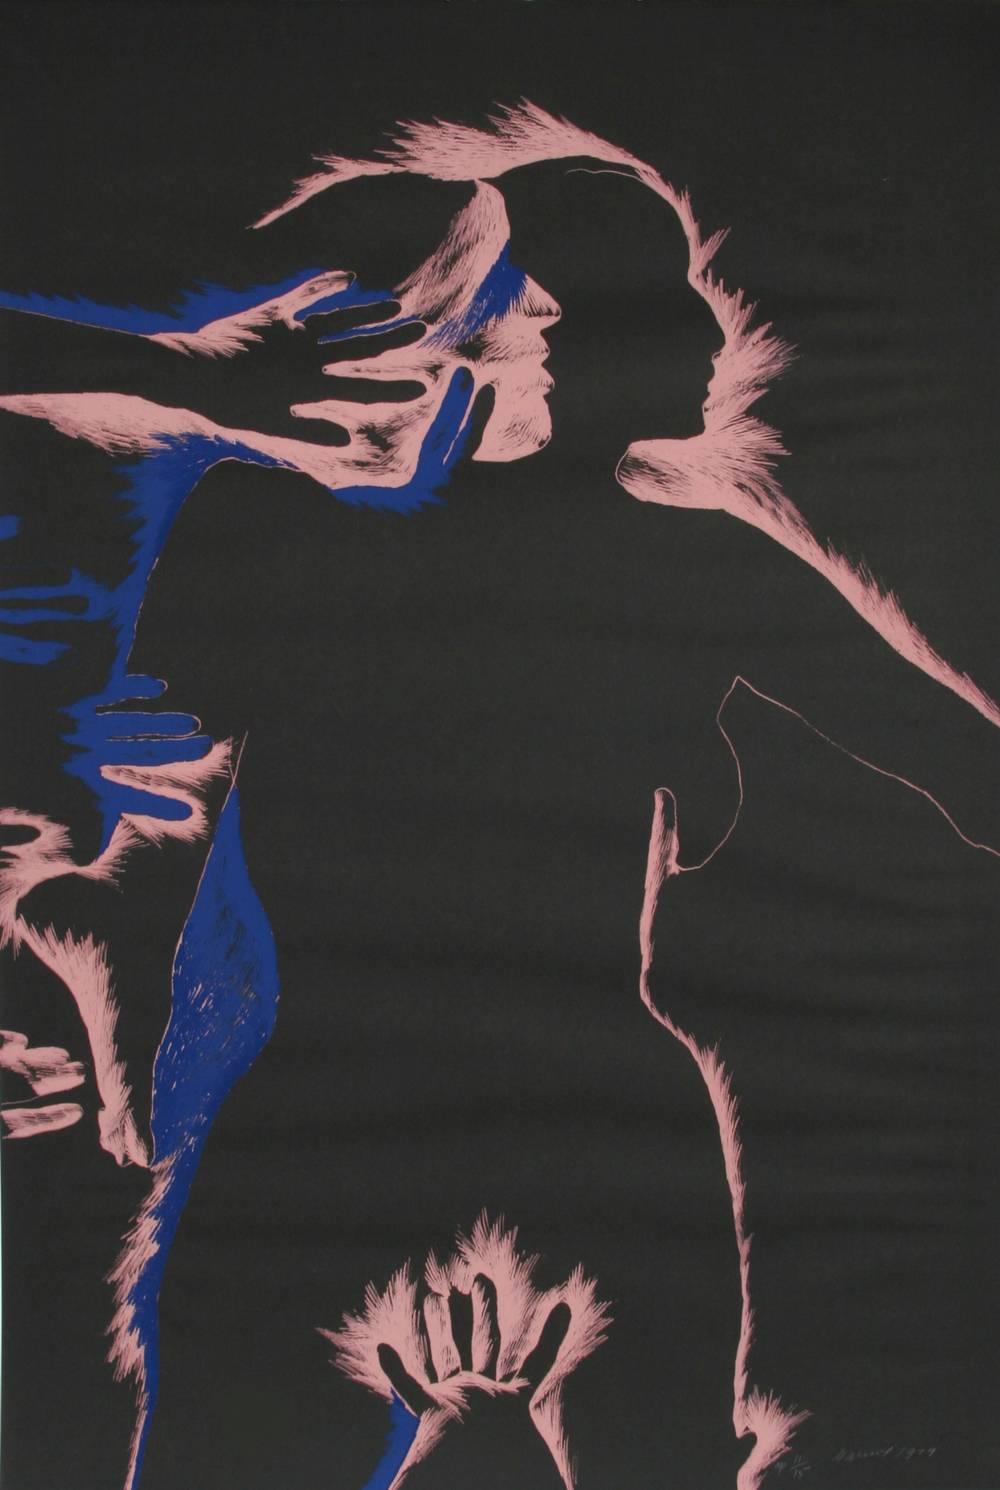 Silhouetted Figures, Lithography by Marisol Escobar